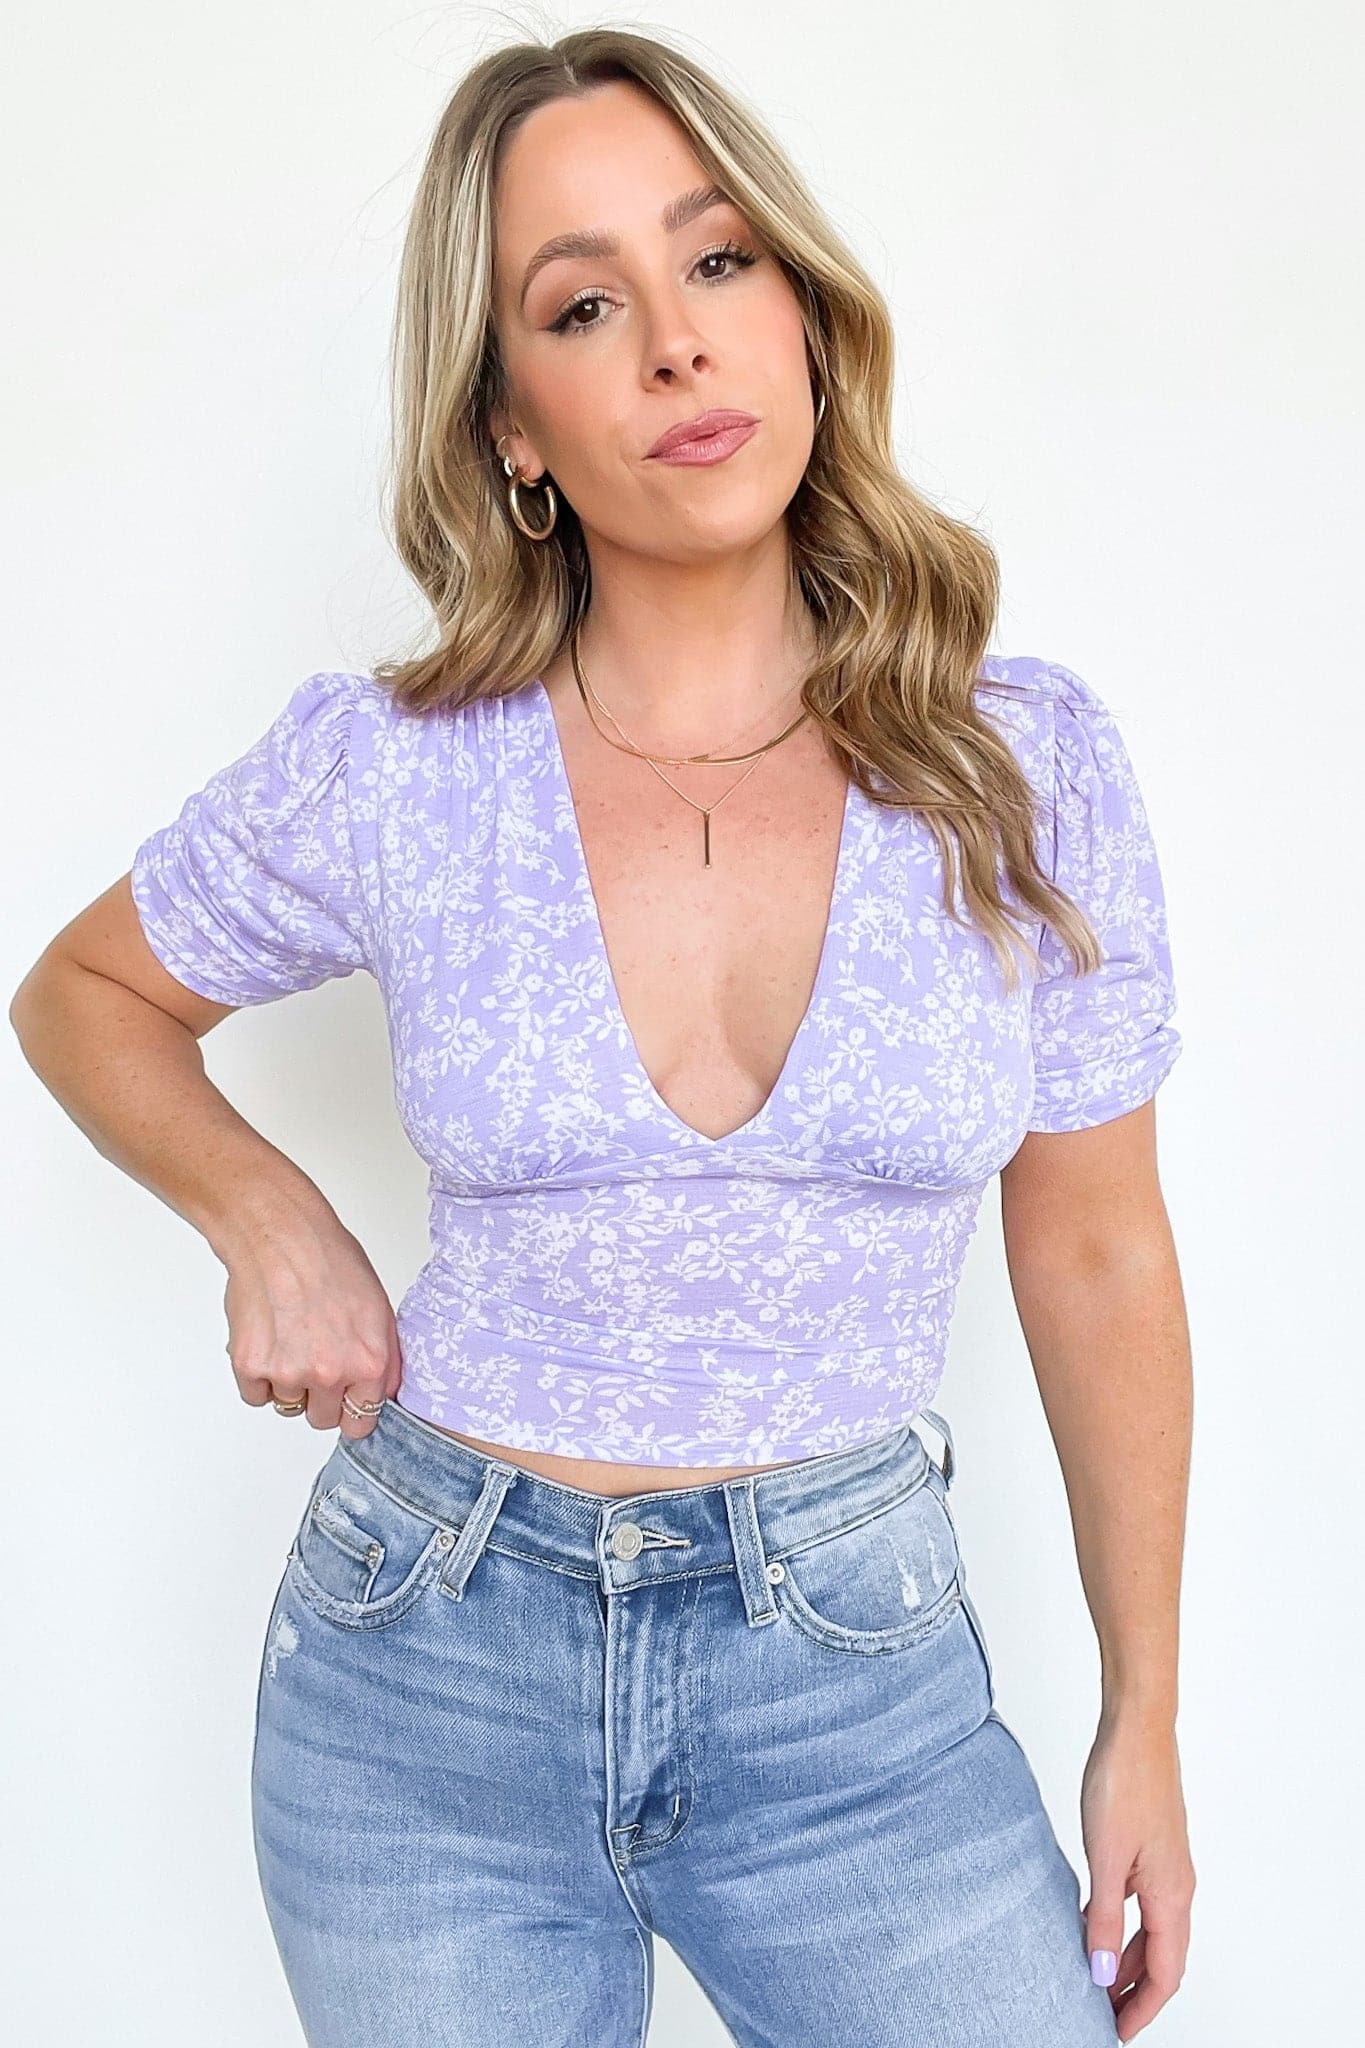  Exquisite One Floral V-Neck Top - FINAL SALE - Madison and Mallory